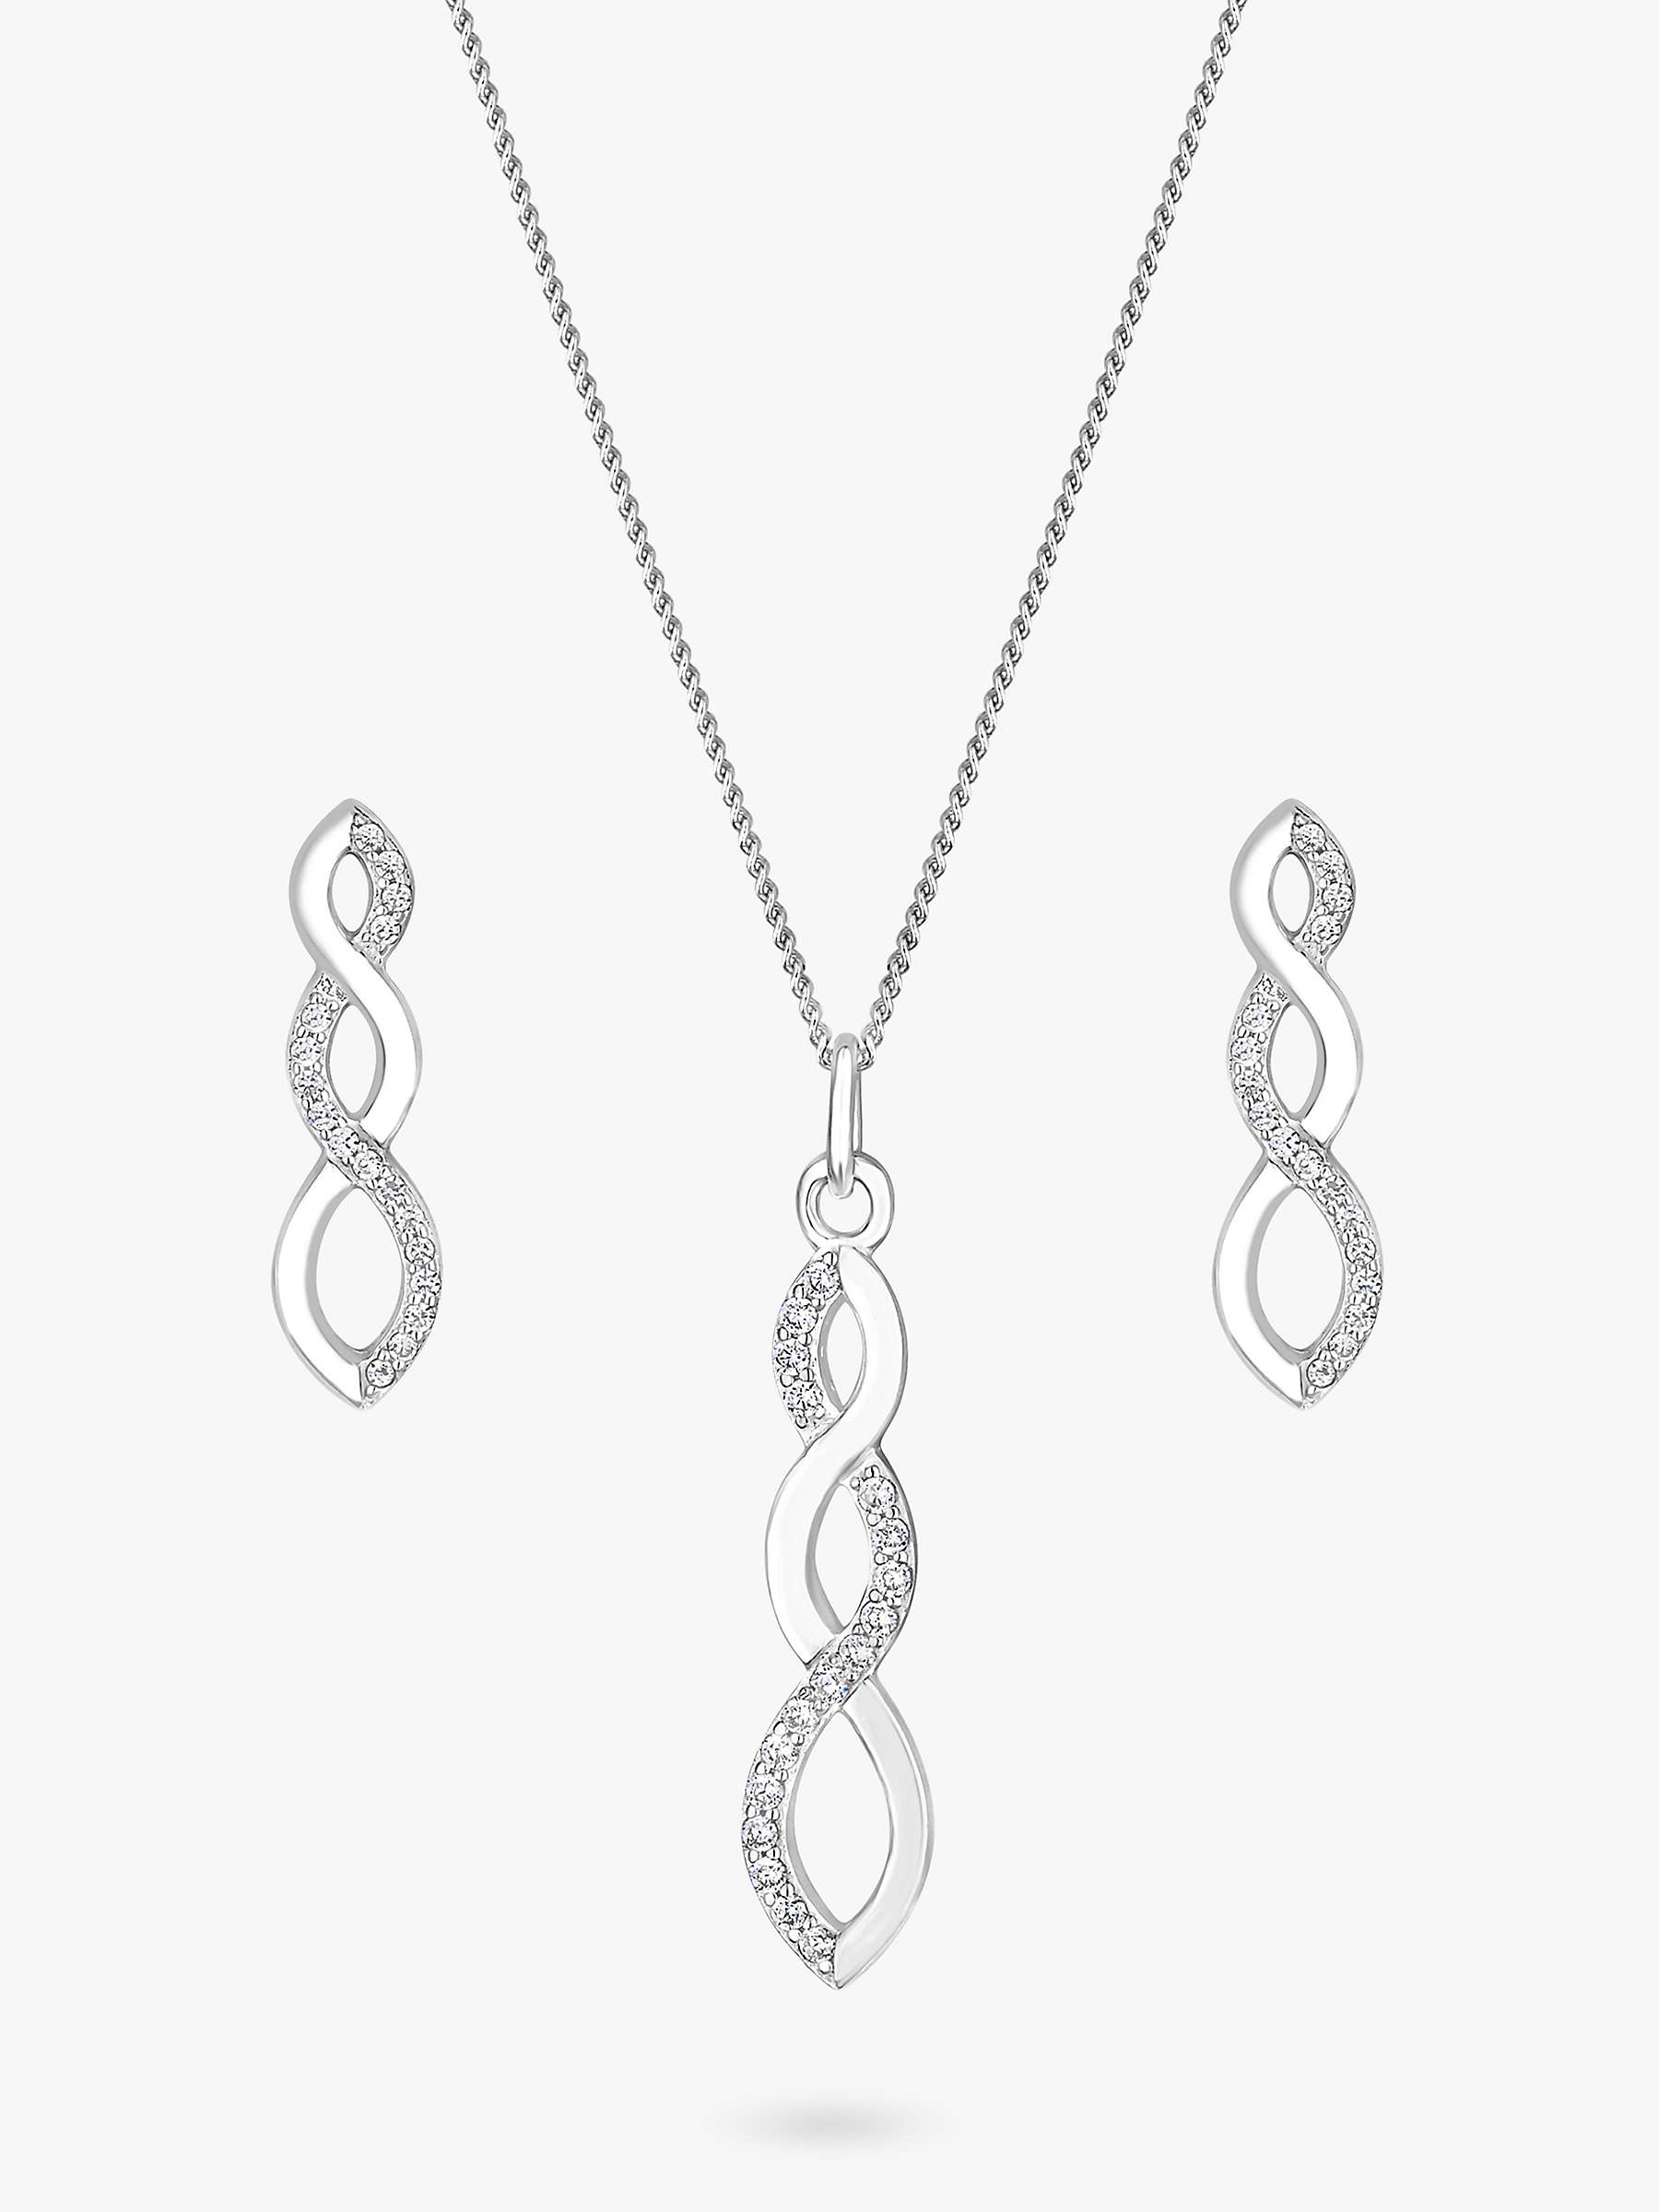 Buy Simply Silver Sterling Silver 925 Cubic Zirconia Infinity Pendant Necklace & Stud Earrings Jewellery Set, Silver Online at johnlewis.com